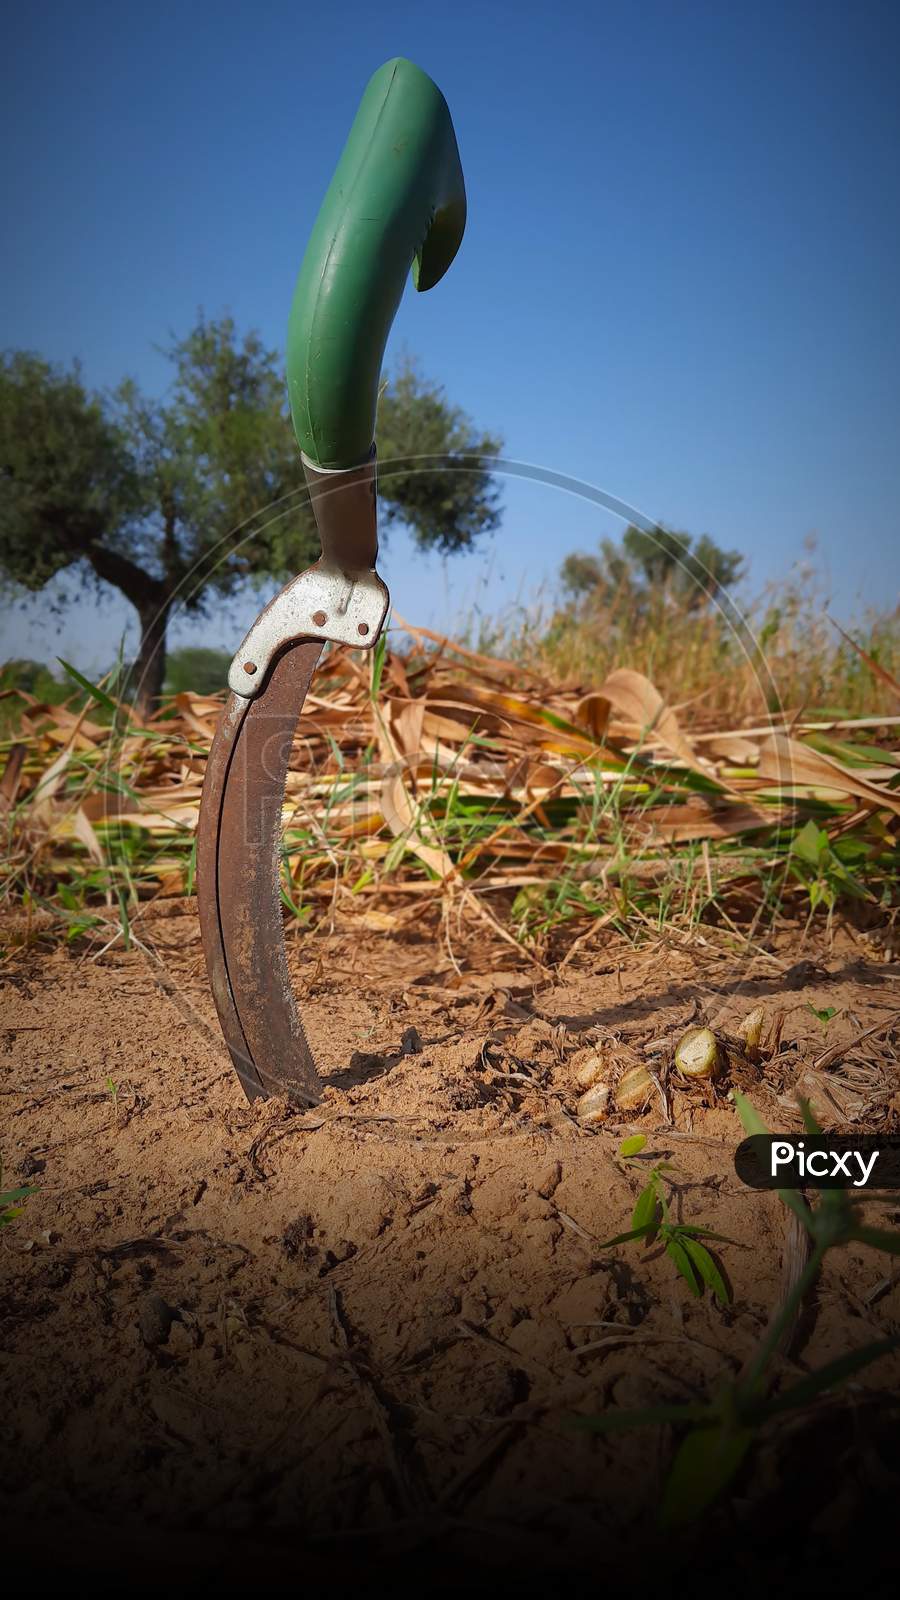 Hand Tool Of Crop Harvesting In Agriculture Land